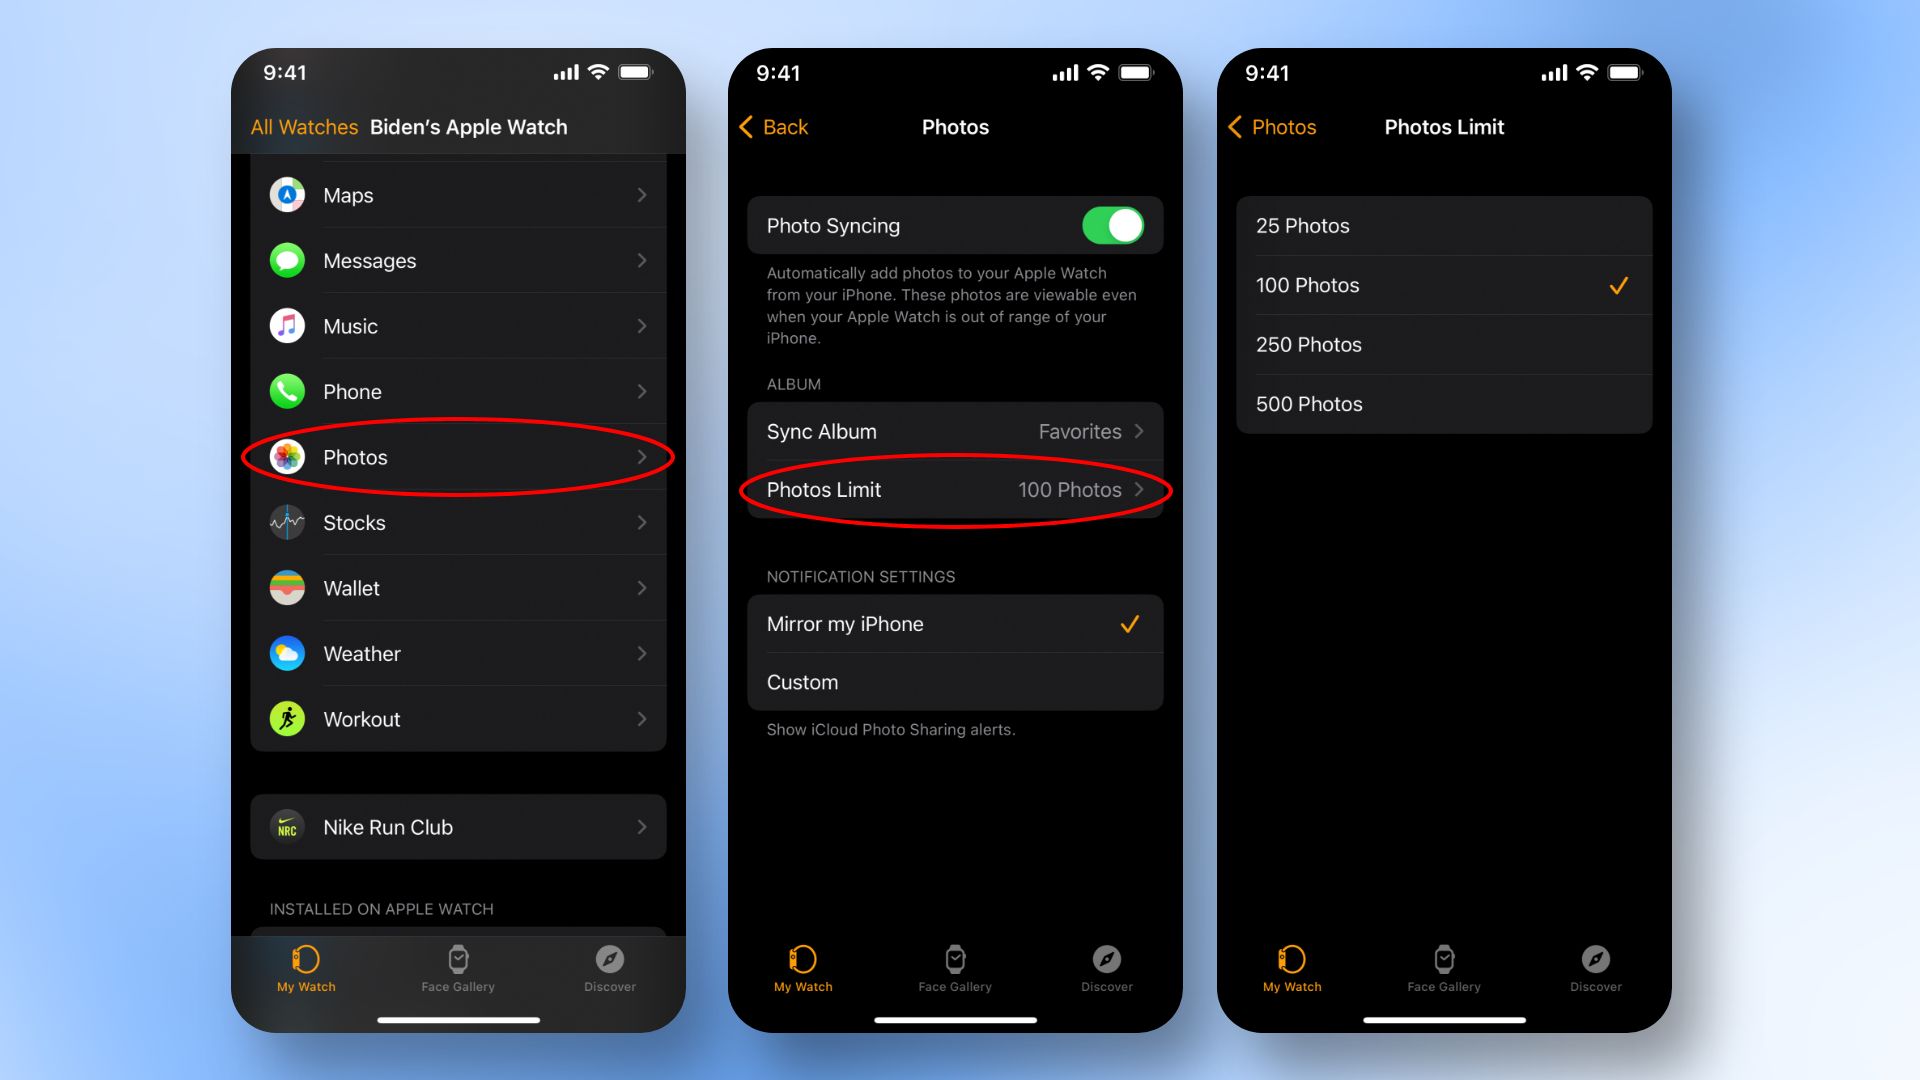 How to put a limit on photo storage on Apple Watch